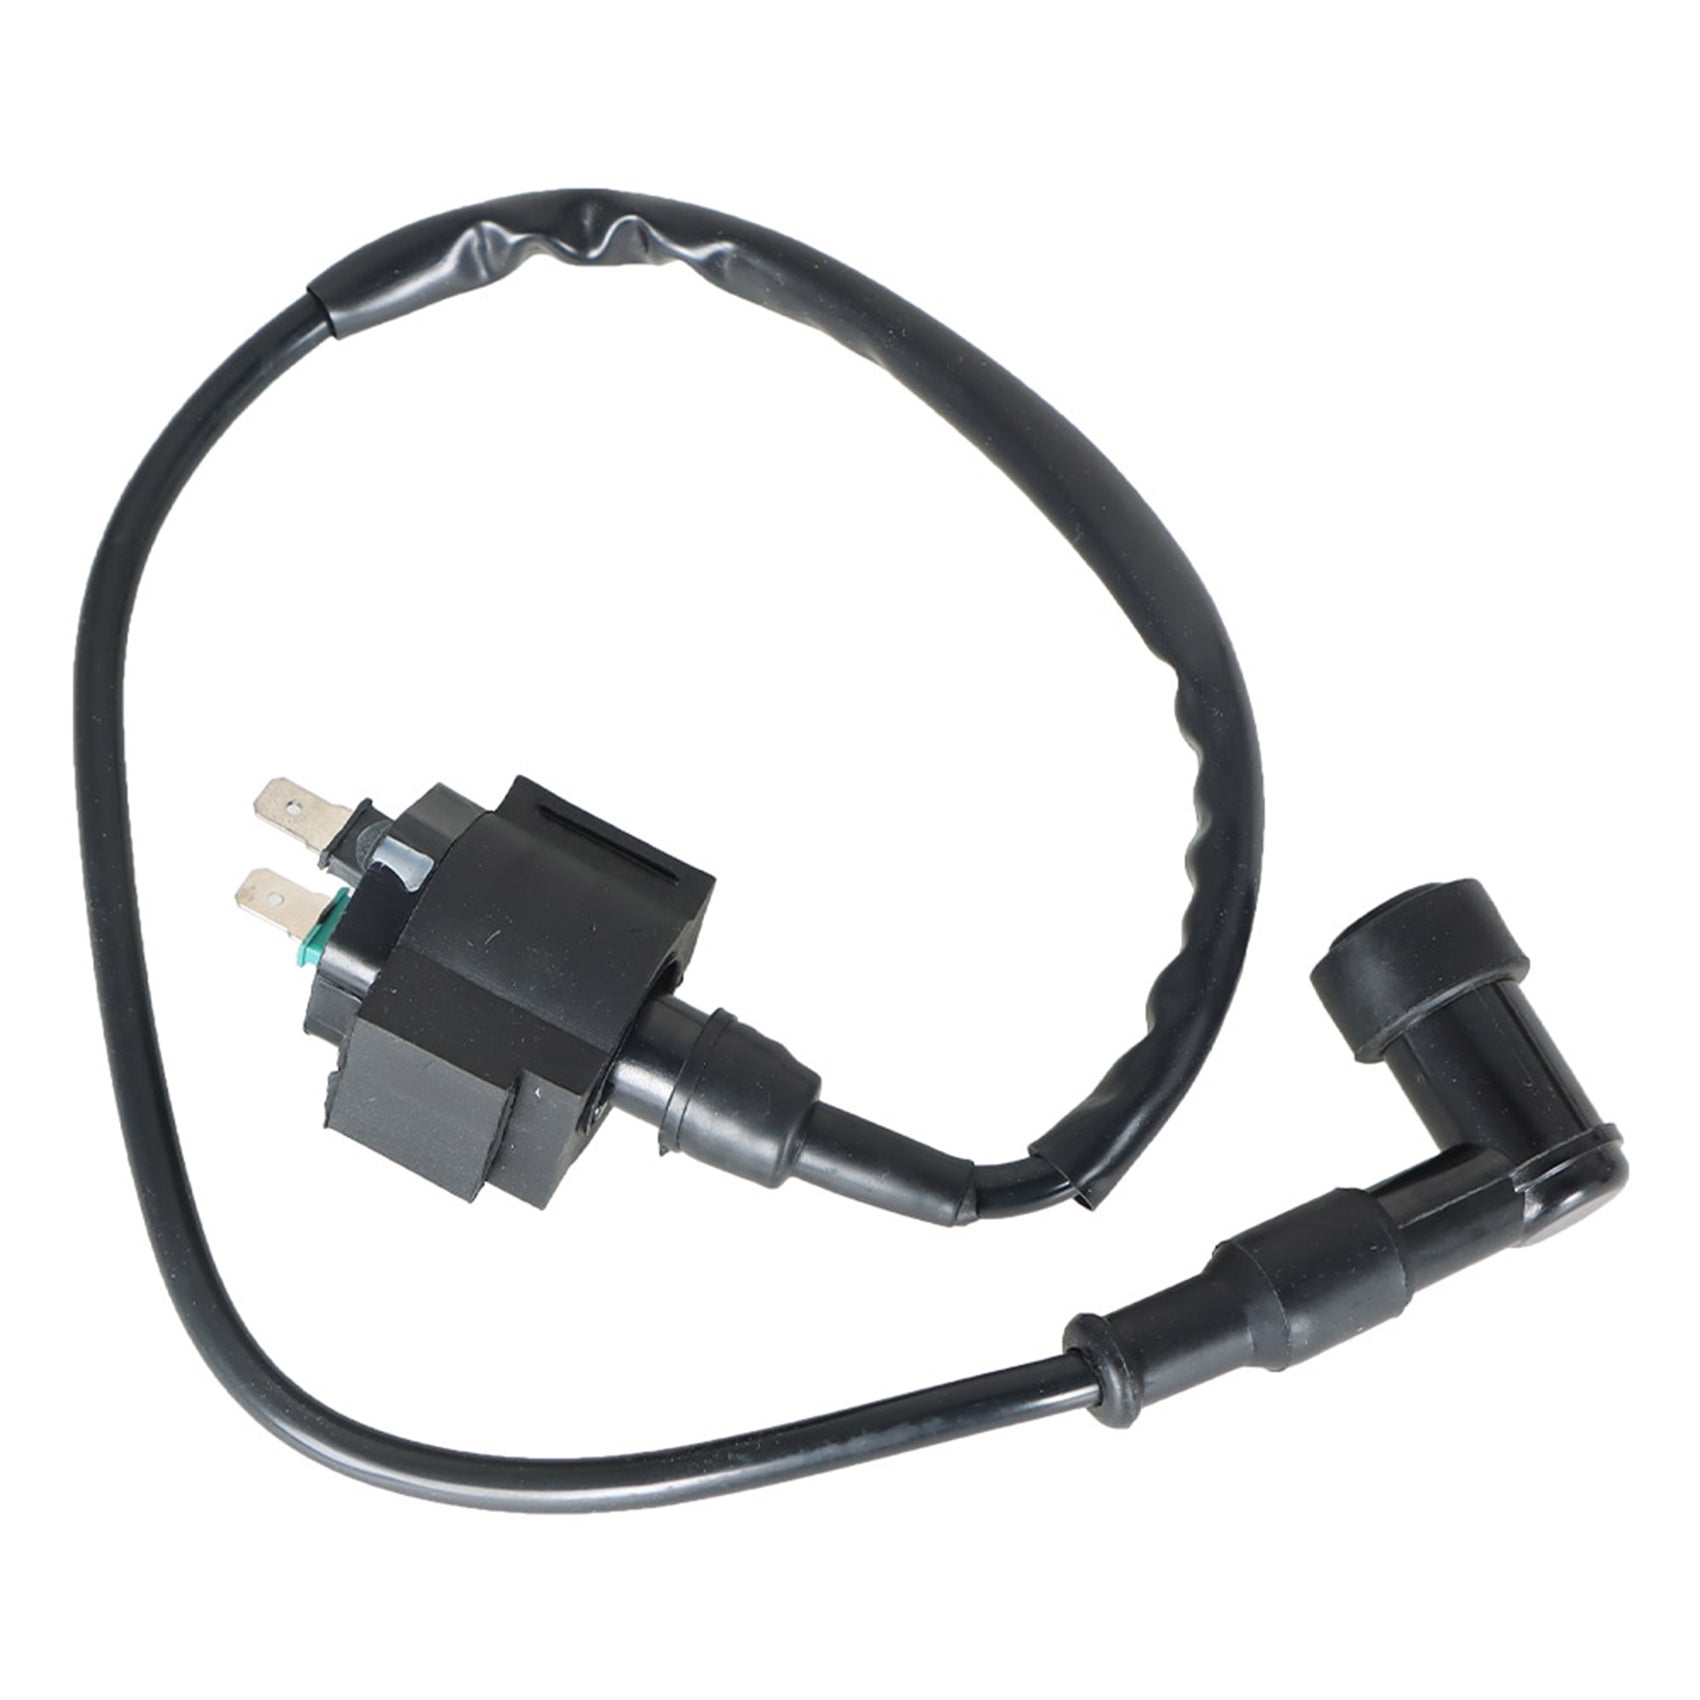 labwork CDI Box Ignition Coil Spark Plug Replacement for Honda CRF100F CRF80F XR80R XR100R 1992-2013